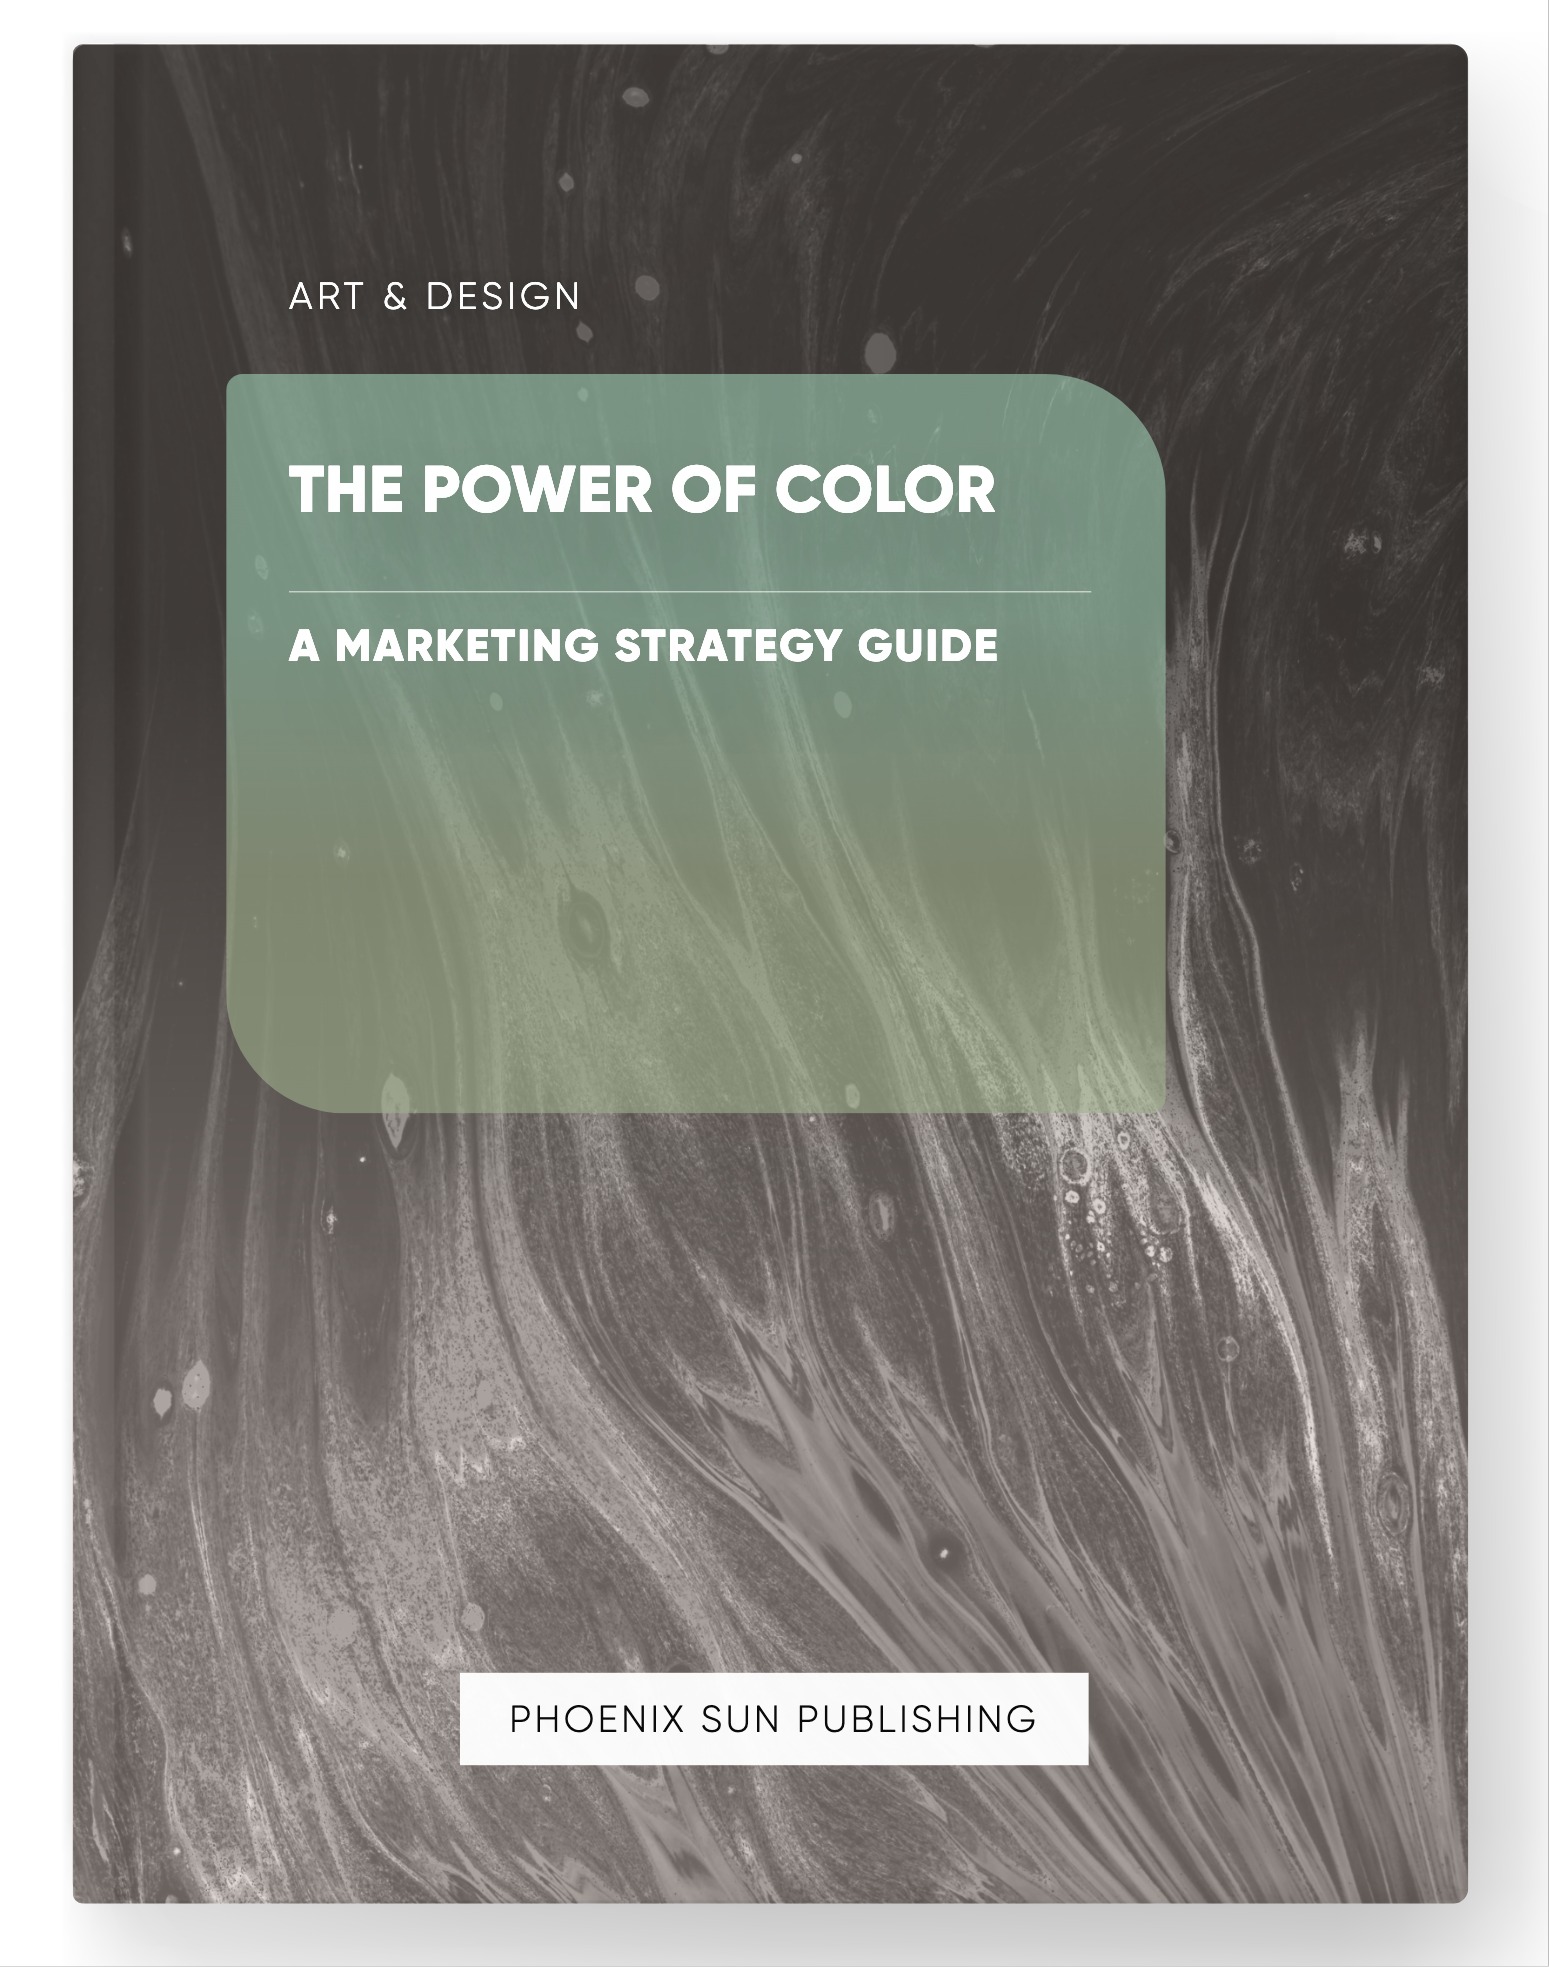 The Power of Color – A Marketing Strategy Guide